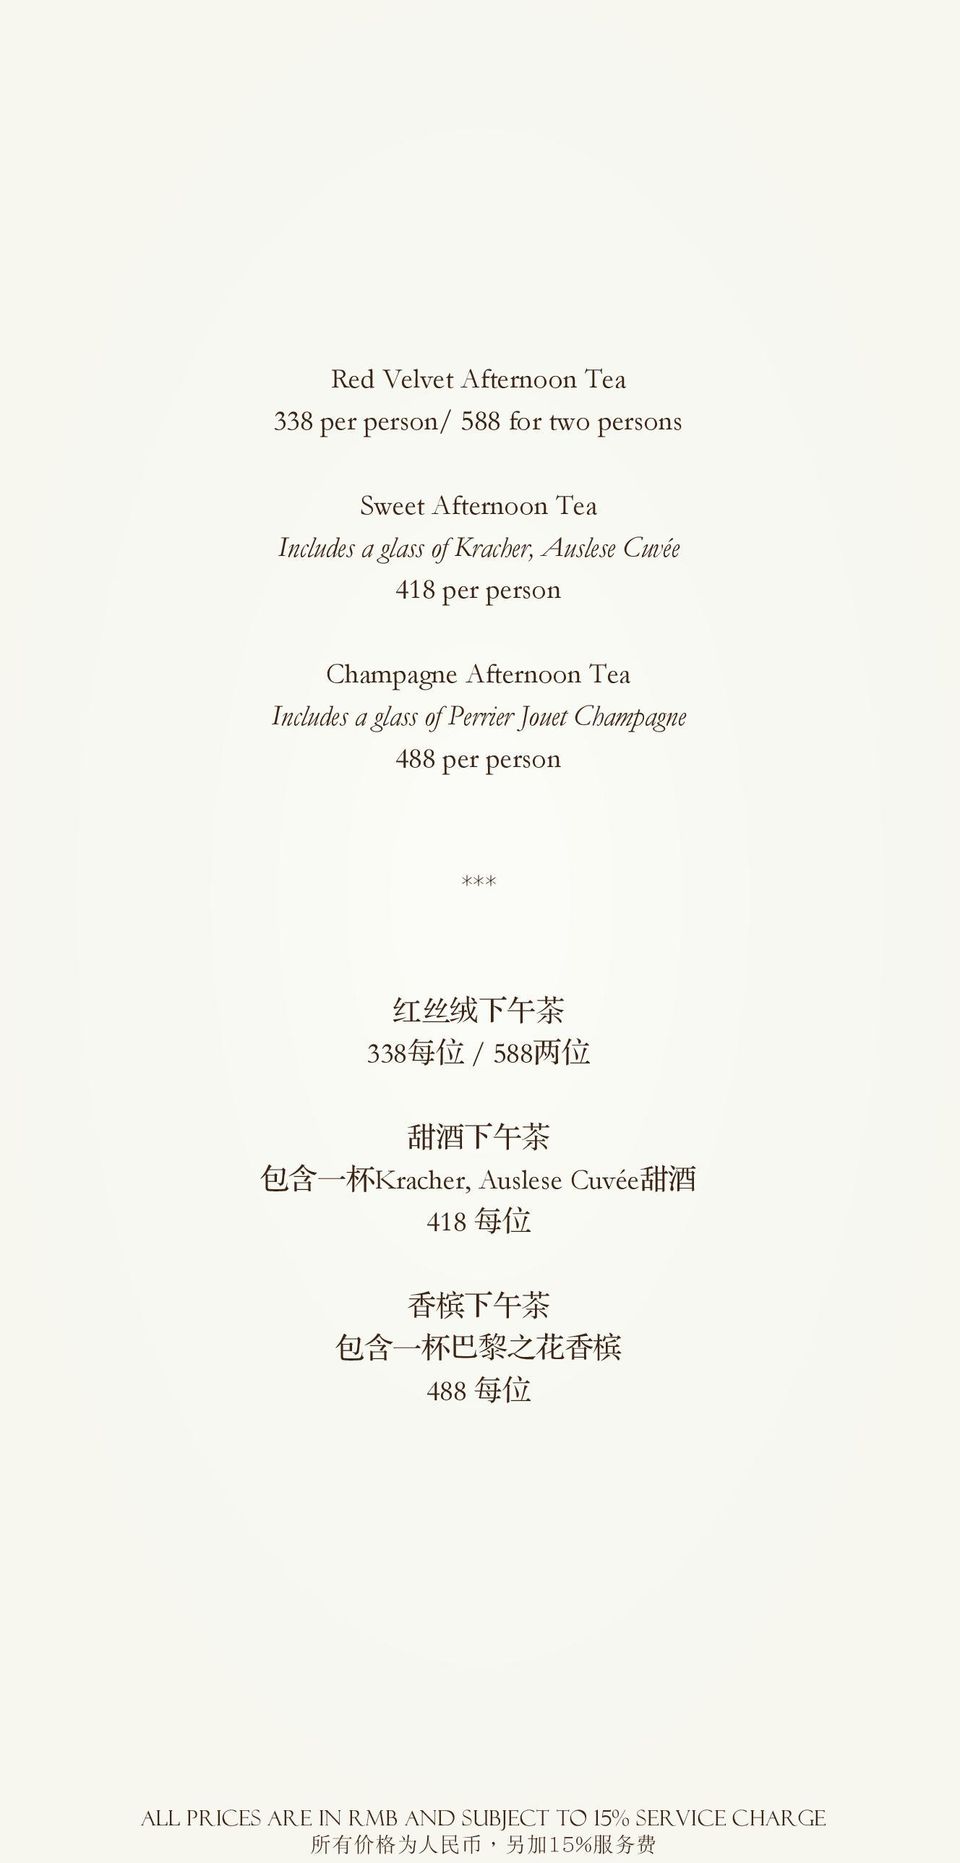 Includes a glass of Perrier Jouet Champagne 488 per person *** 红 丝 绒 下 午 茶 338 每 位 /